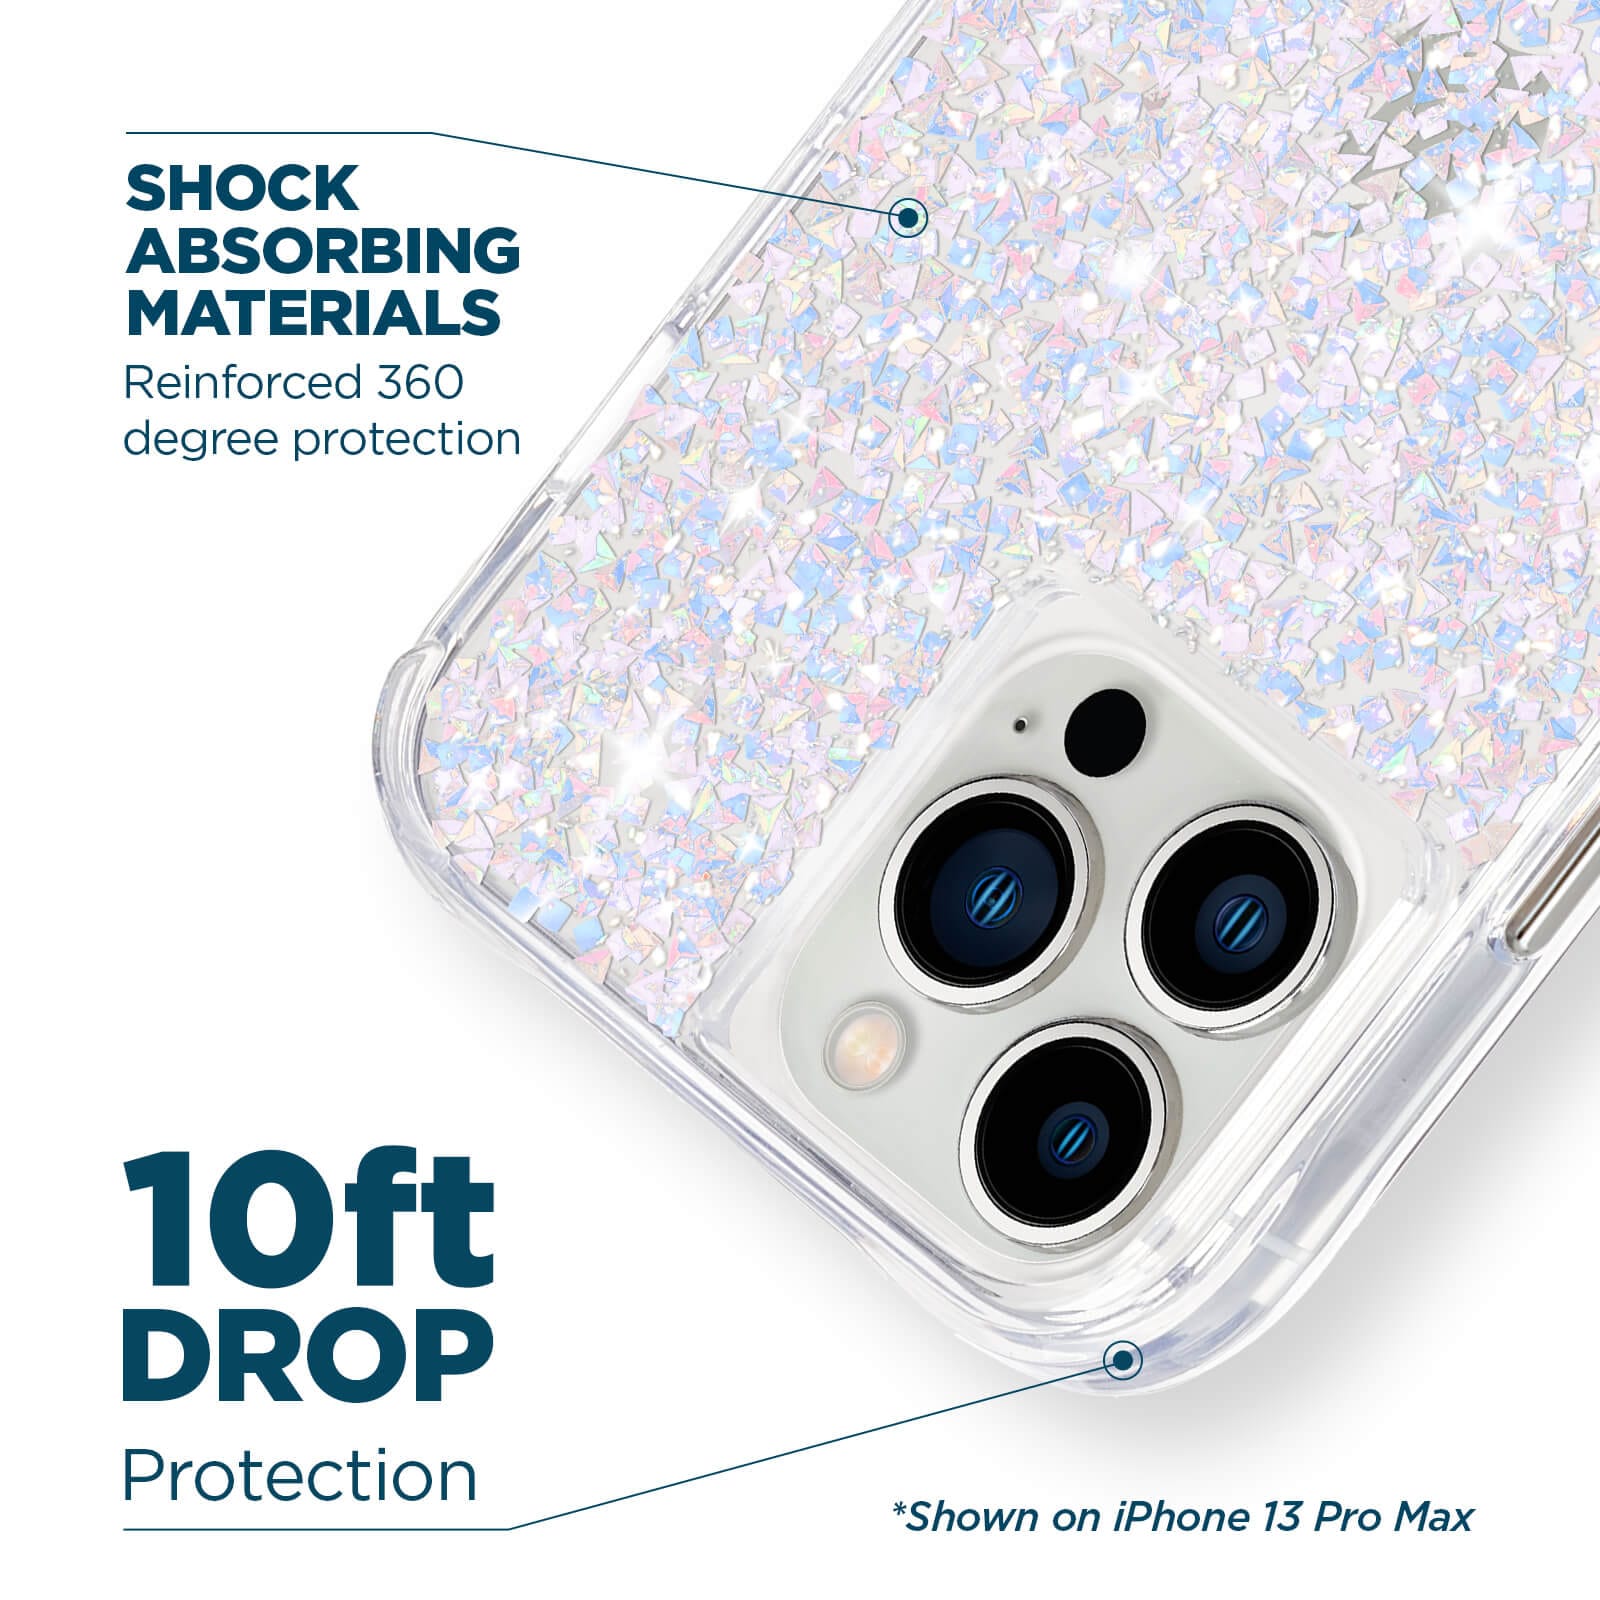 Shock absorbing materials reinforced 360 degree protection. 10ft drop protection. Shown on iPhone 13 pro Max. color::Twinkle Diamond